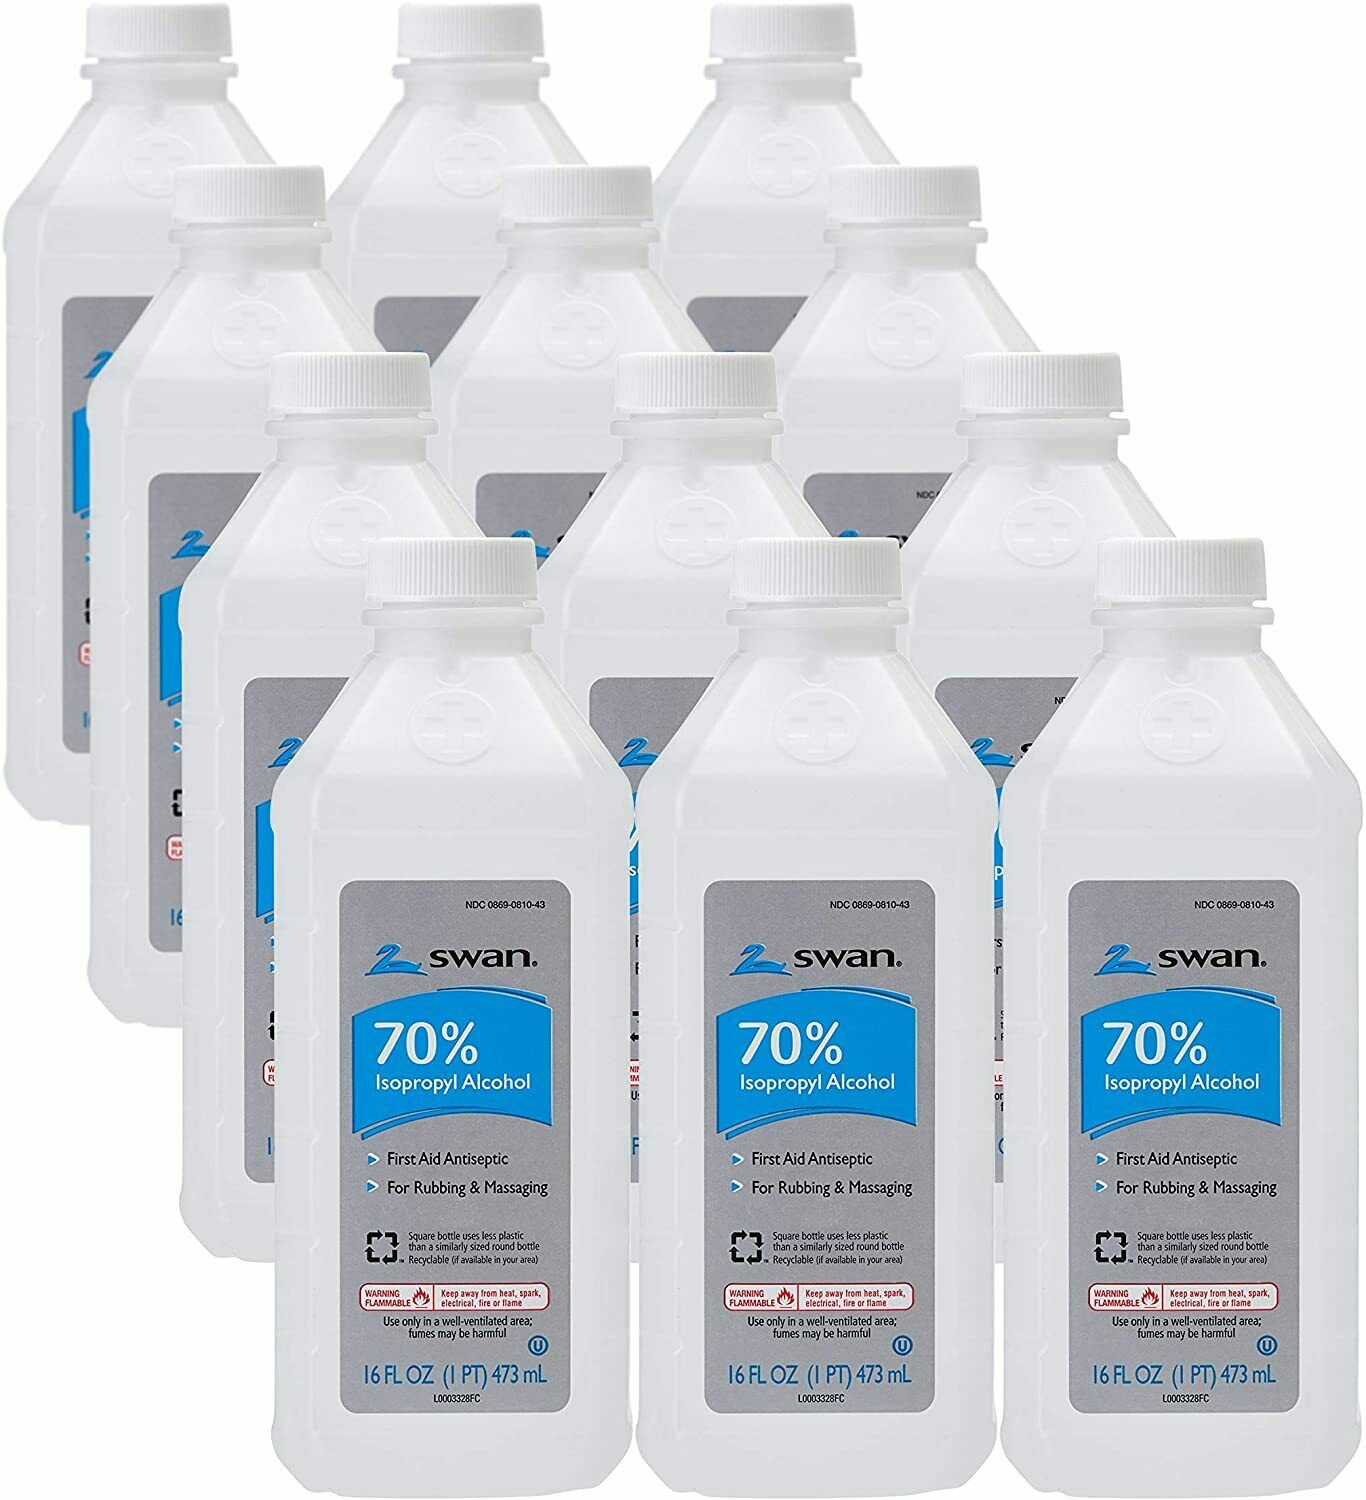 Swan 70% Isopropyl Alcohol (Case of 12) - One Source Medical Supplies